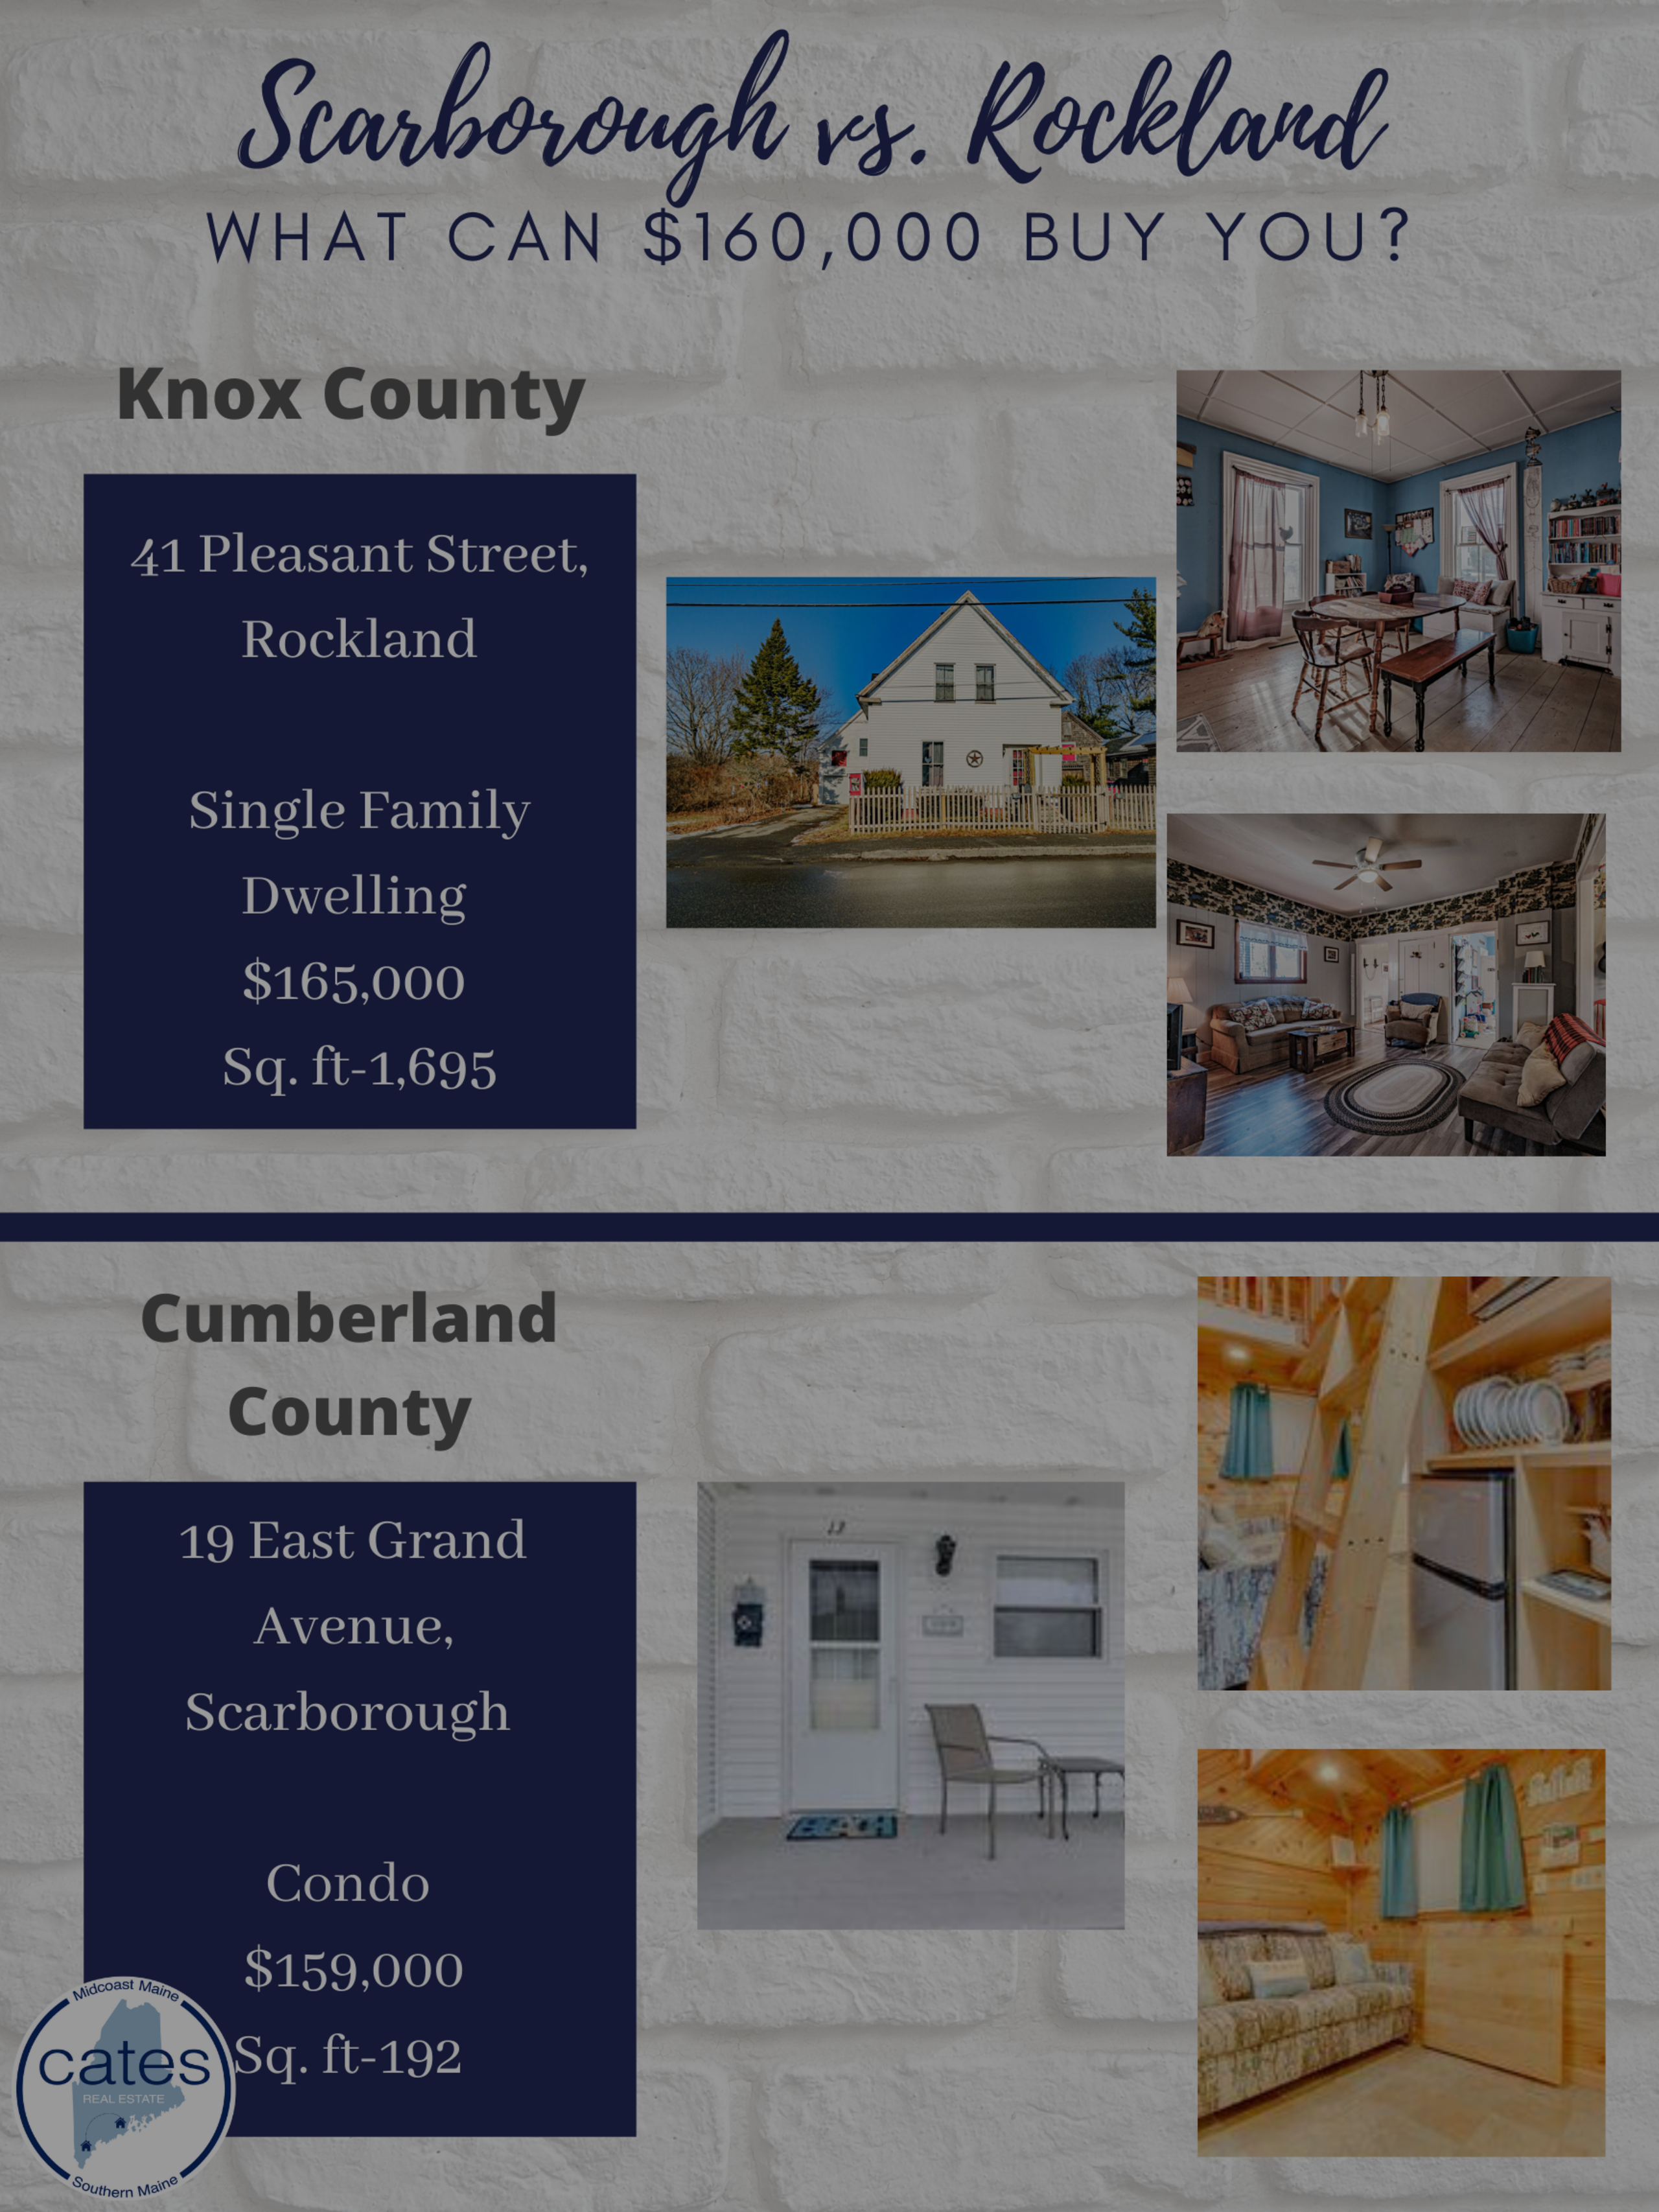 What Can $160,000 Buy You? Southern Maine vs. Midcoast Maine